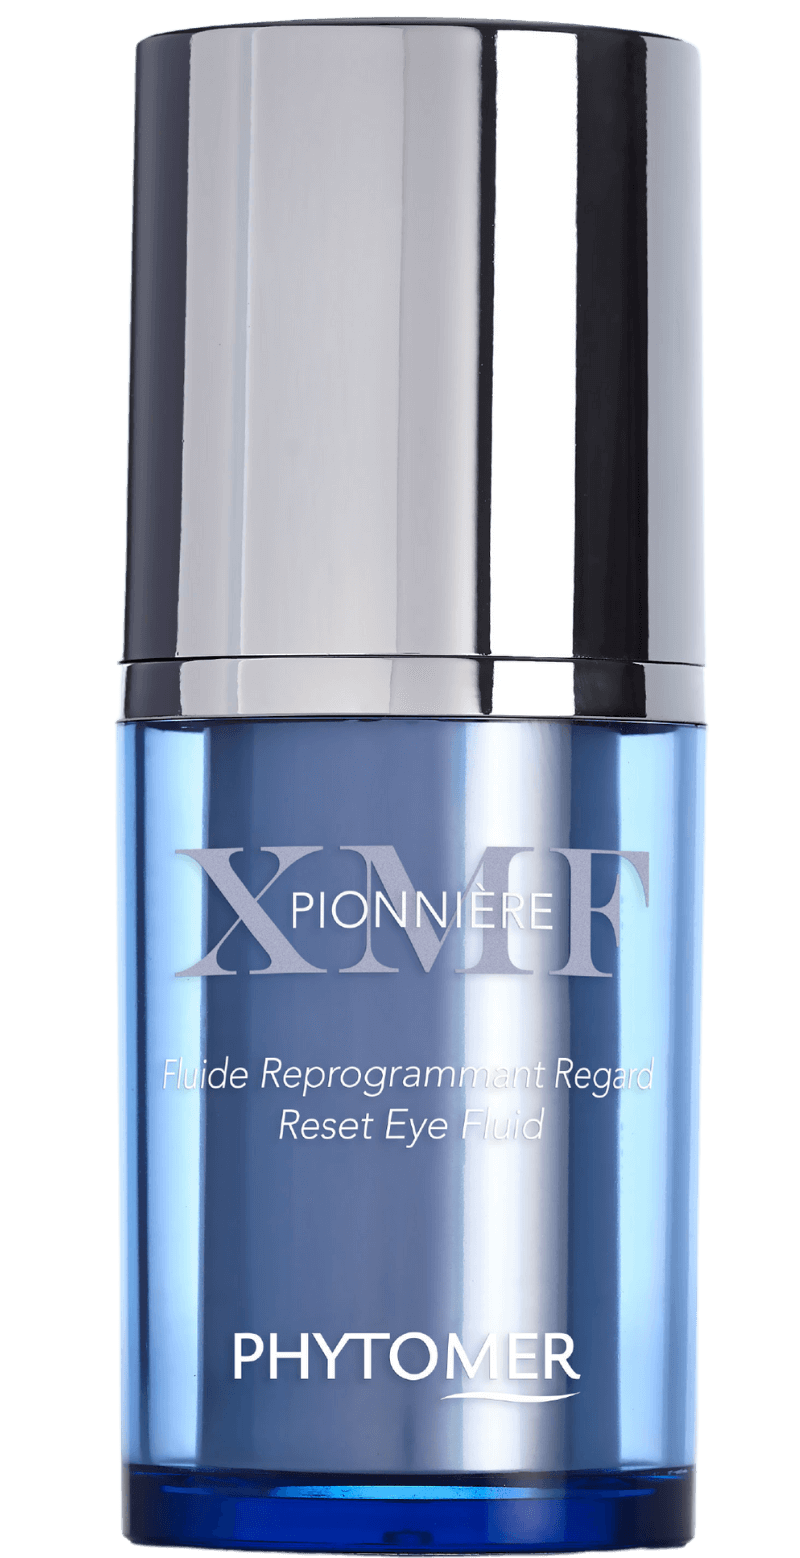 &#39;s Phytomer PIONNIERE XMF Reset Eye Fluid - Bellini&#39;s Skin and Parfumerie 